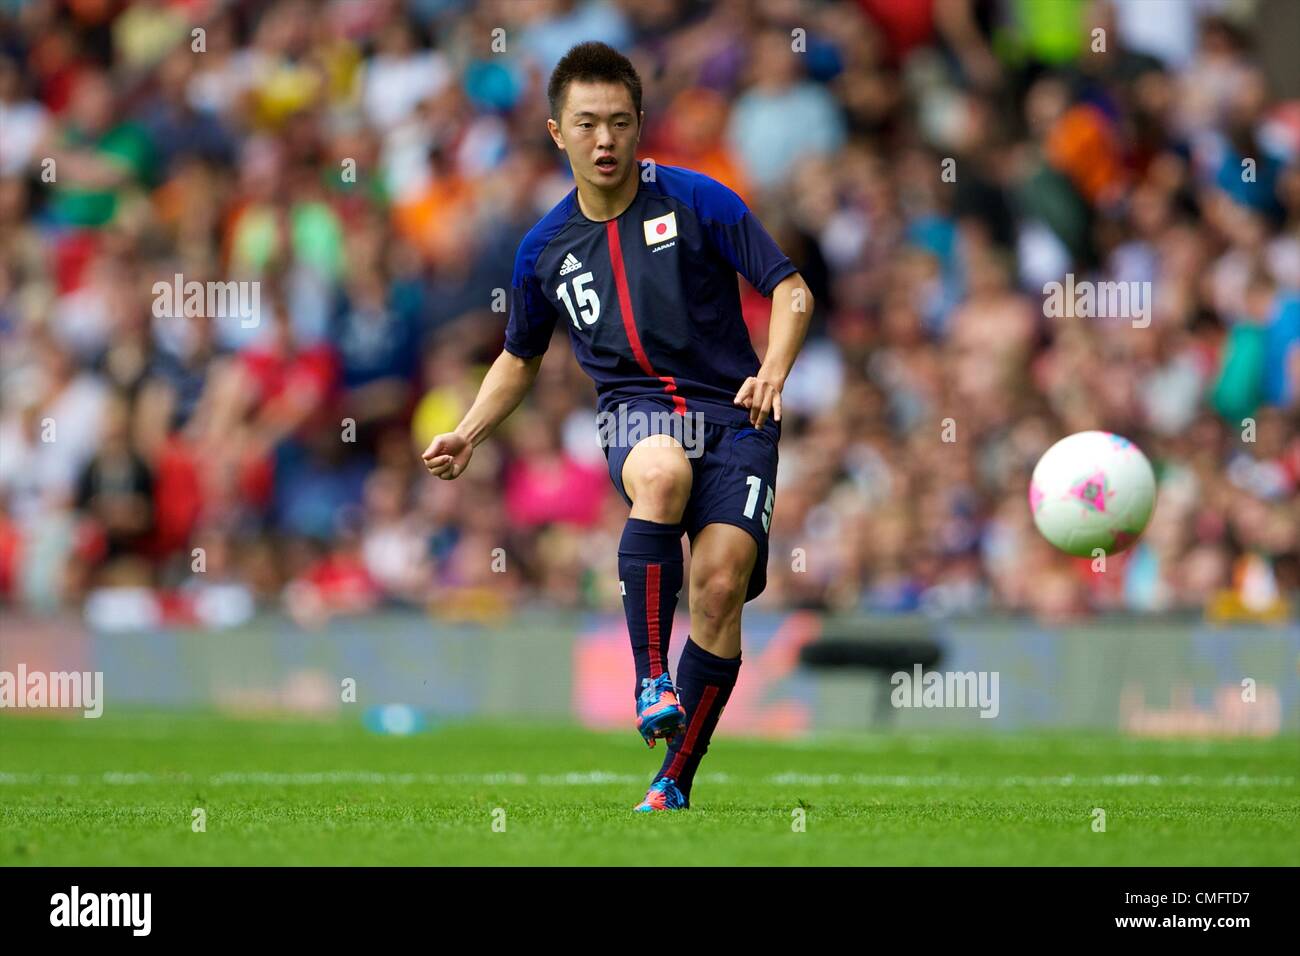 UK. 04.08.2012 Manchester, England. Japan forward Manabu Saito in action during the quarter final match between Japan and Egypt at Old Trafford. Japan won the game by a score of 3-0 to proceed to the tournament semi-finals. Stock Photo